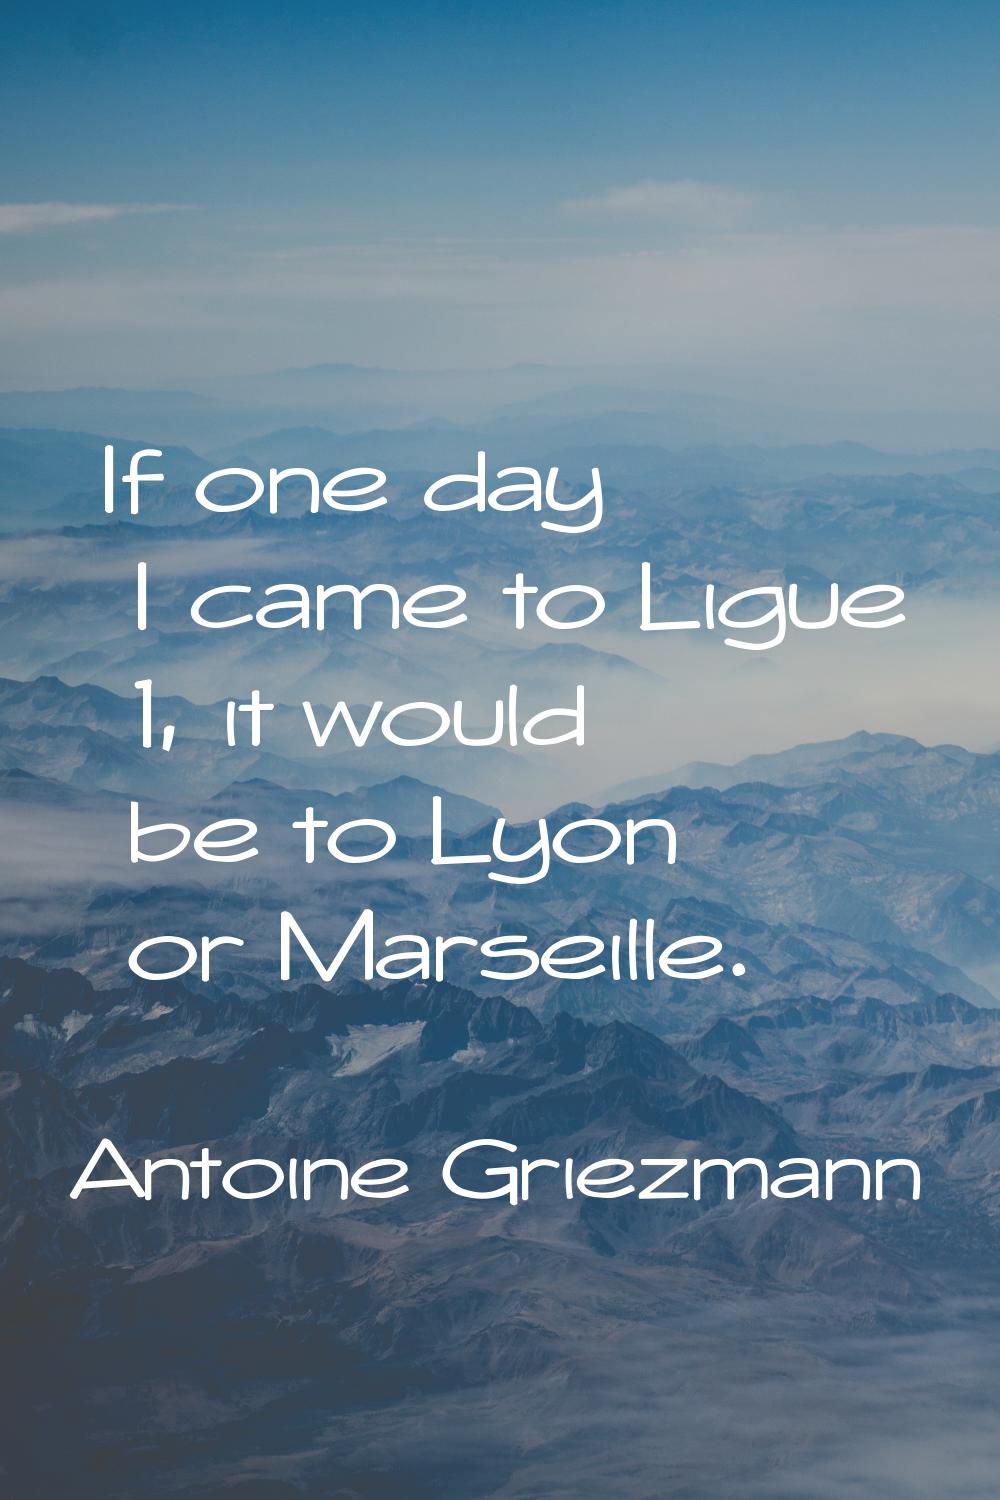 If one day I came to Ligue 1, it would be to Lyon or Marseille.